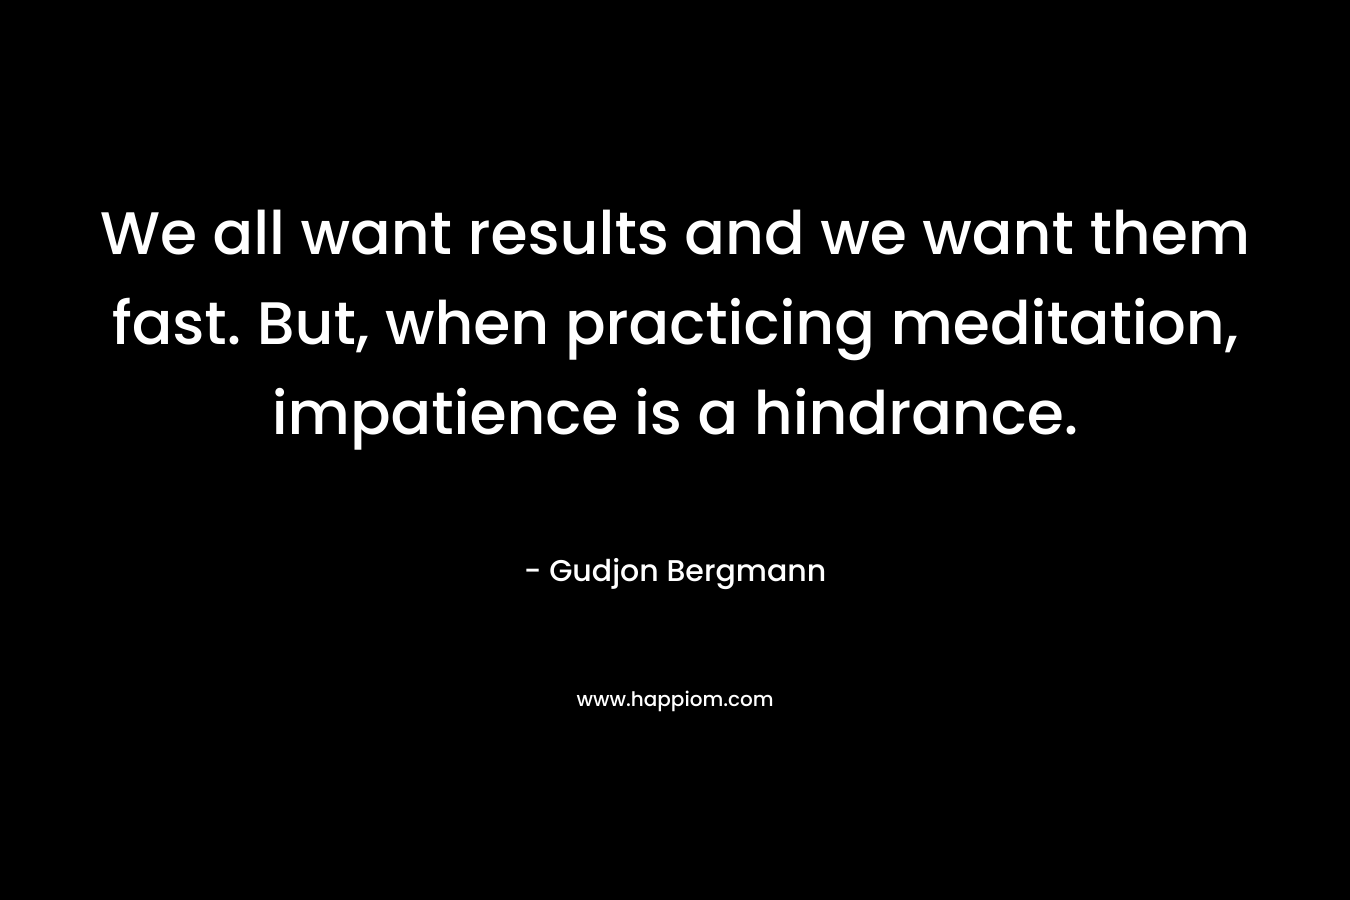 We all want results and we want them fast. But, when practicing meditation, impatience is a hindrance. – Gudjon Bergmann